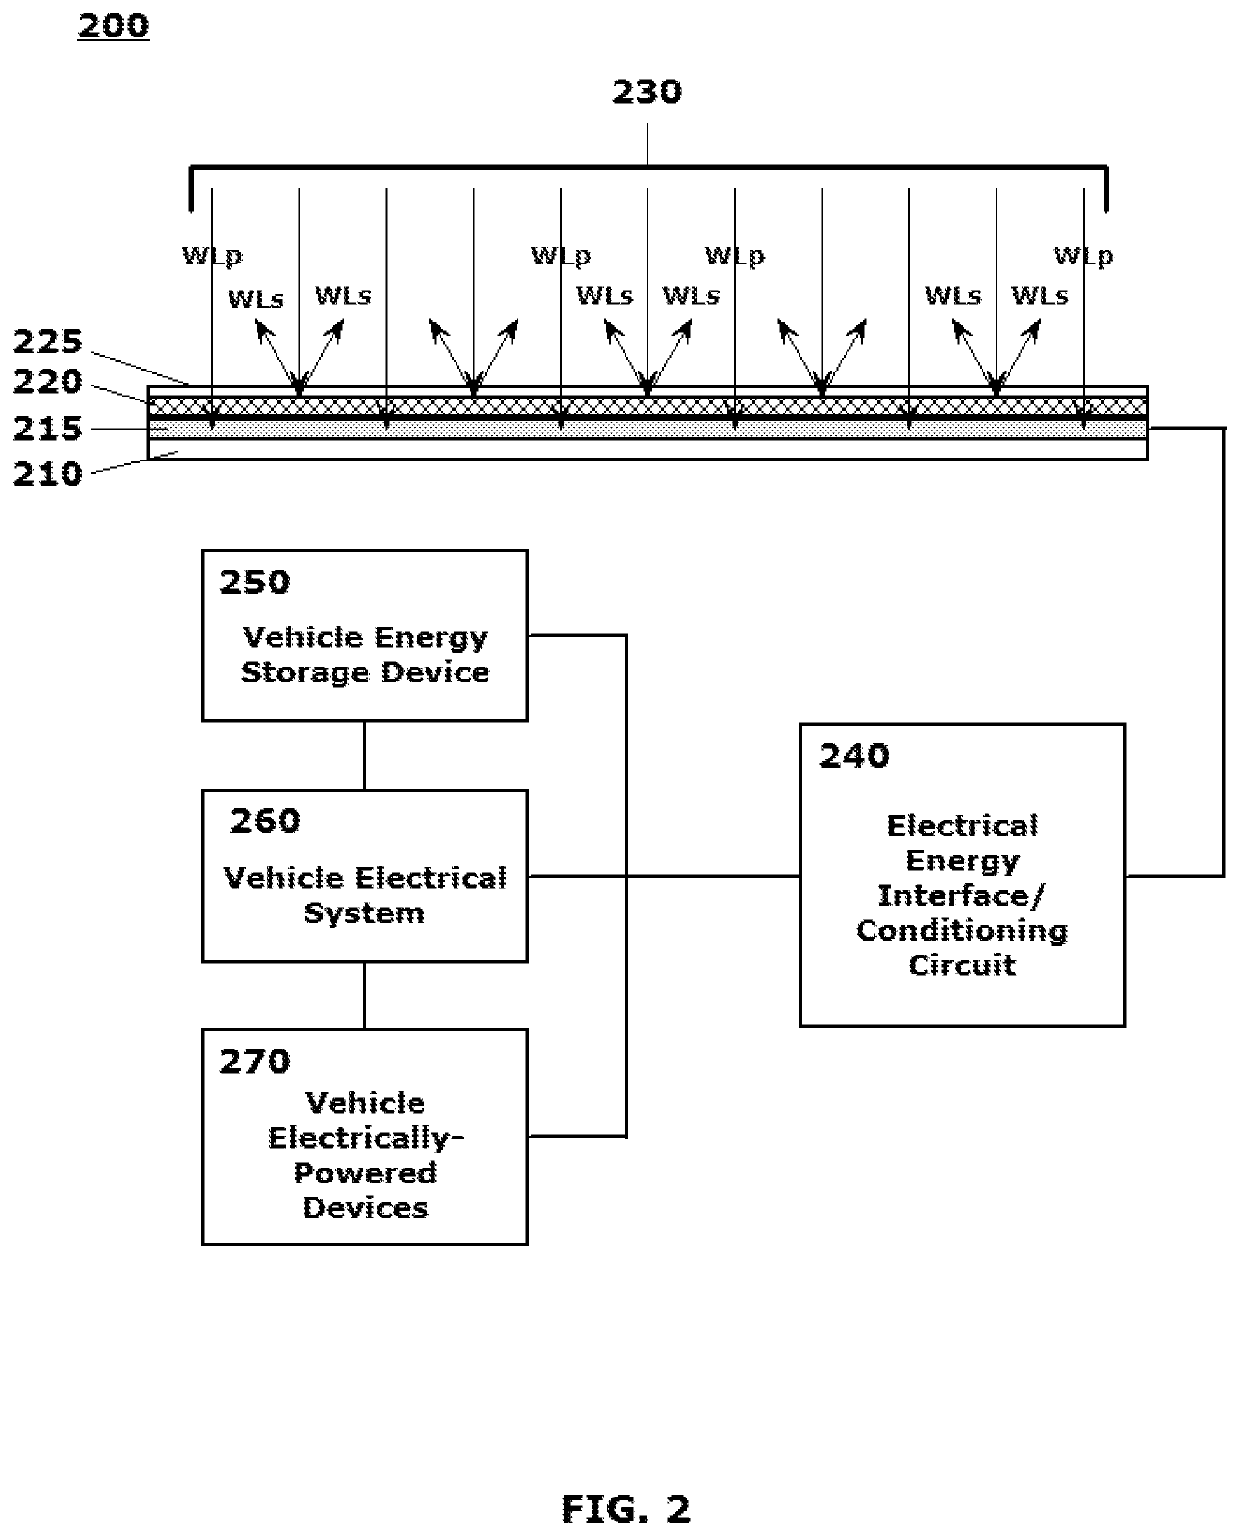 Energy harvesting methods for providing autonomous electrical power to vehicles and electrically-powered devices in vehicles